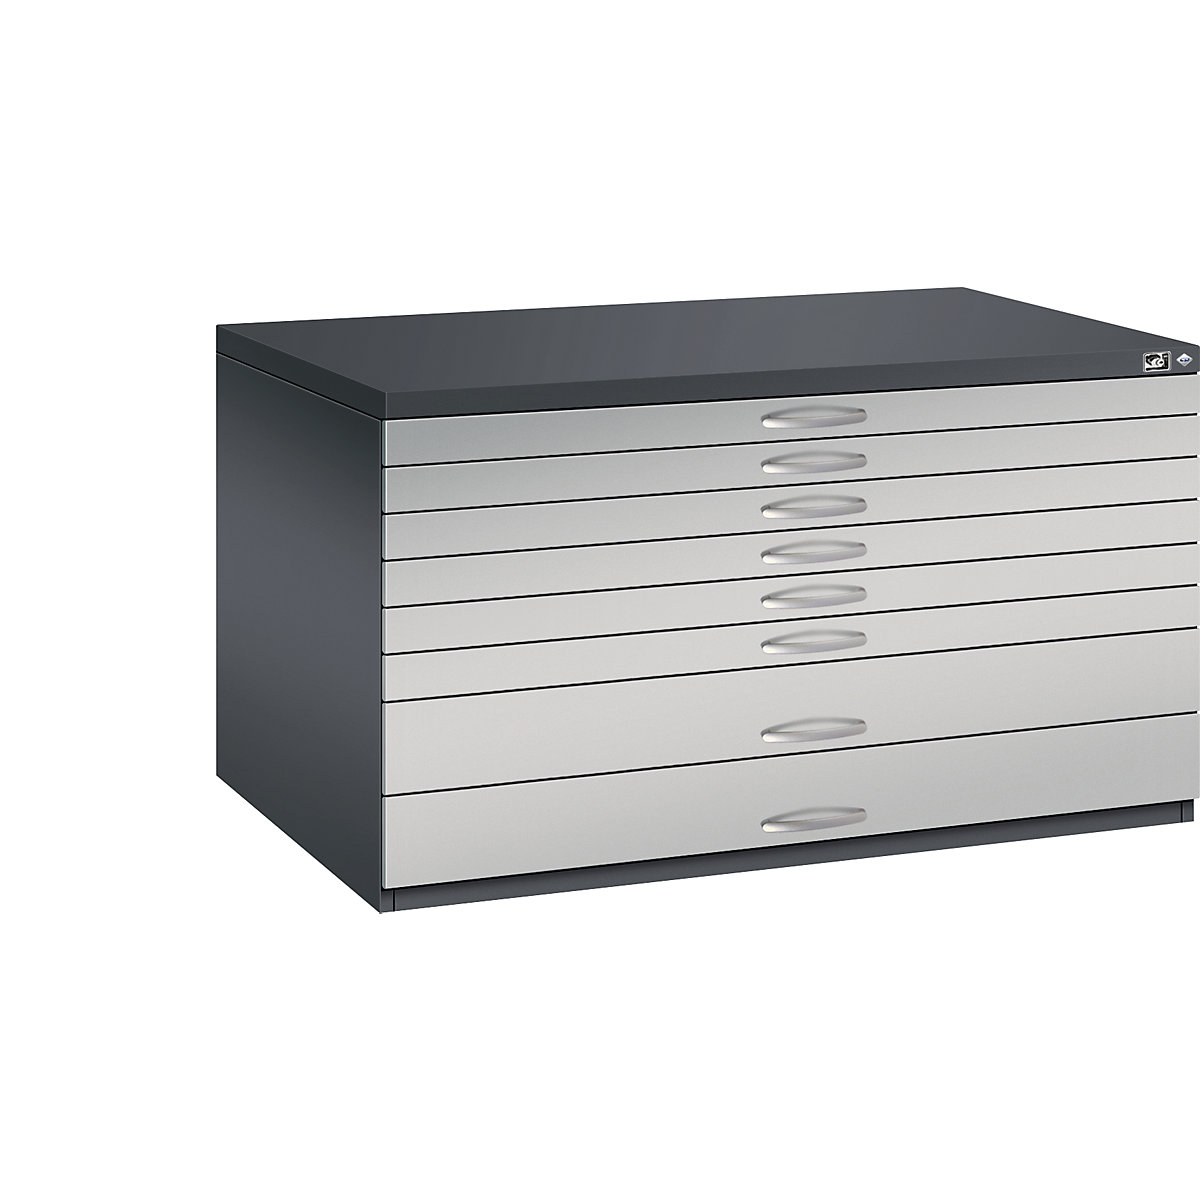 Drawing cabinet – C+P, A0, 8 drawers, height 760 mm, black grey / white aluminium-17